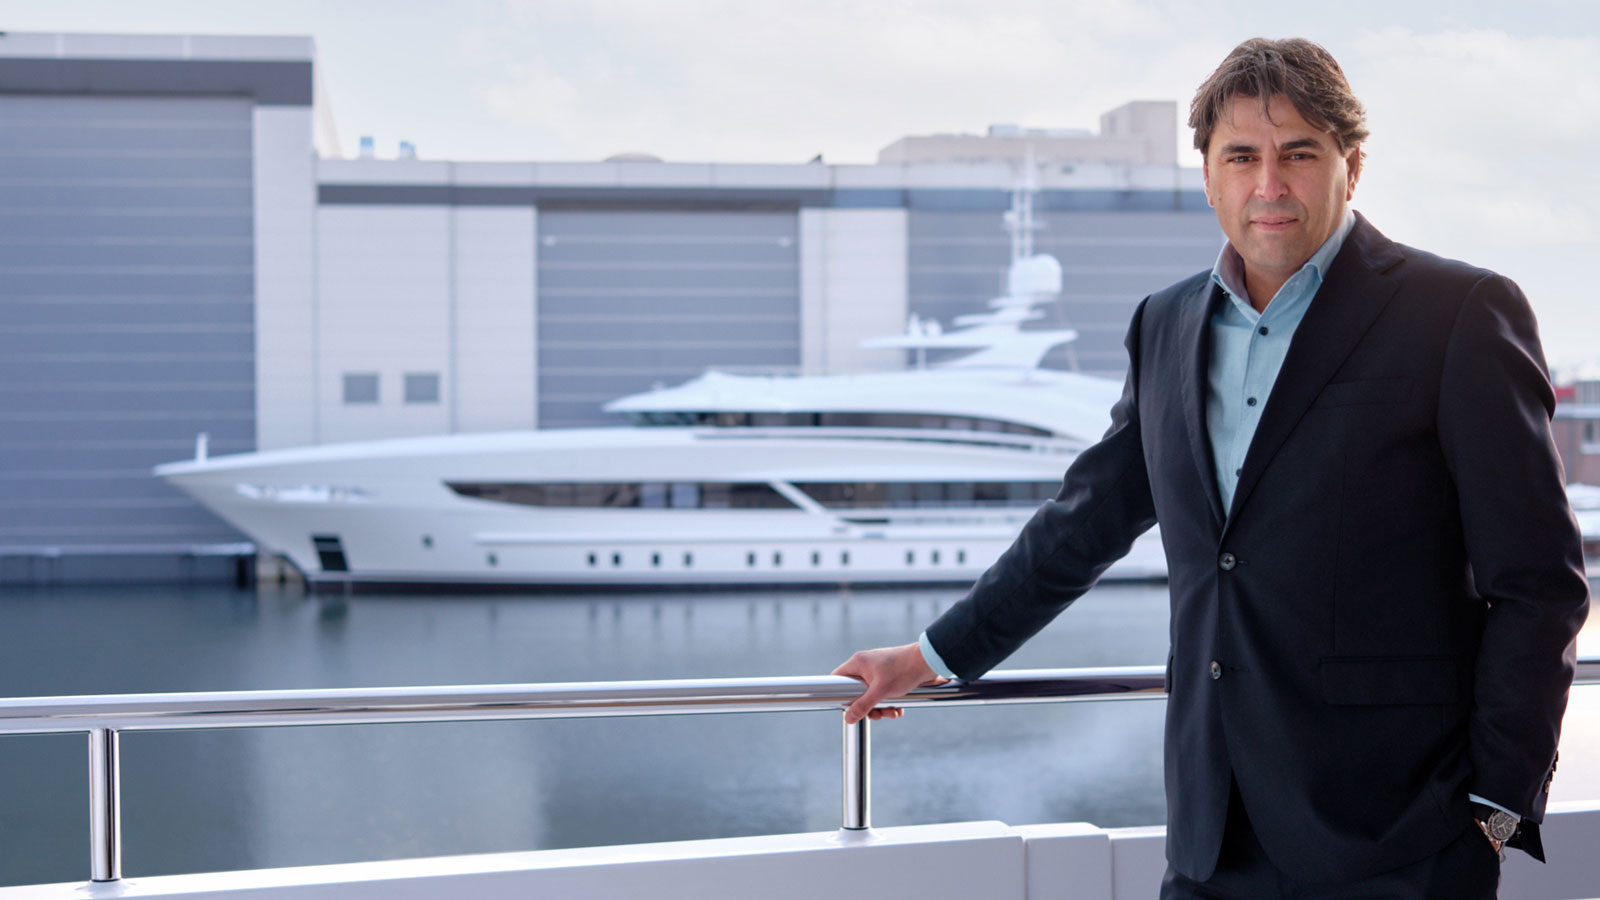 New CCO appointment: Friso Visser joins the Heesen team on February 16 - Heesen Yachts